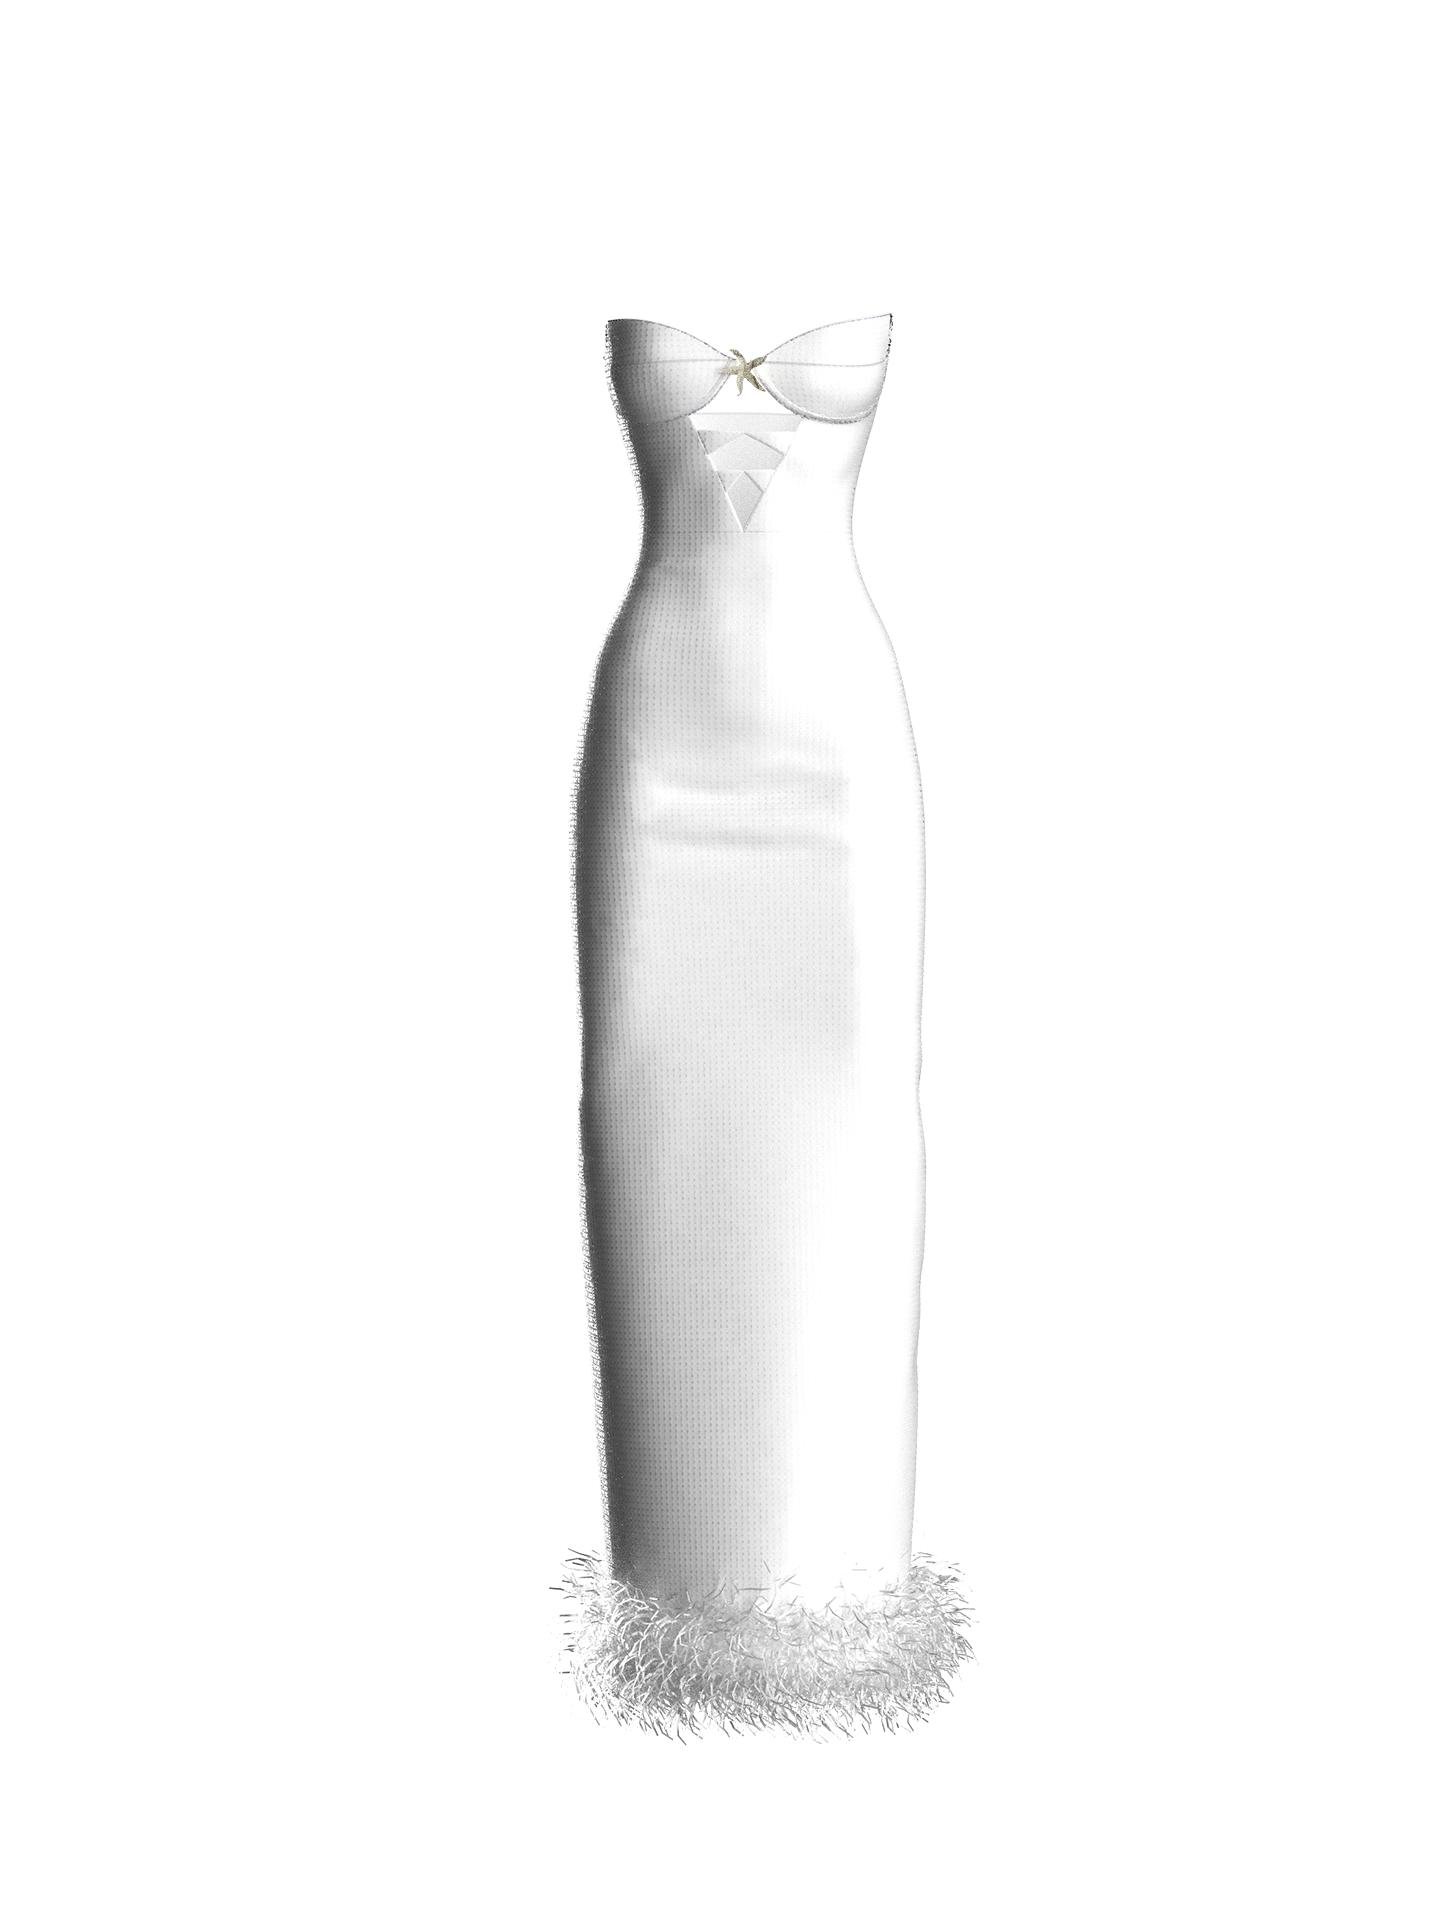 SEQUINED WHITE GOWN by SUDI ETUZ